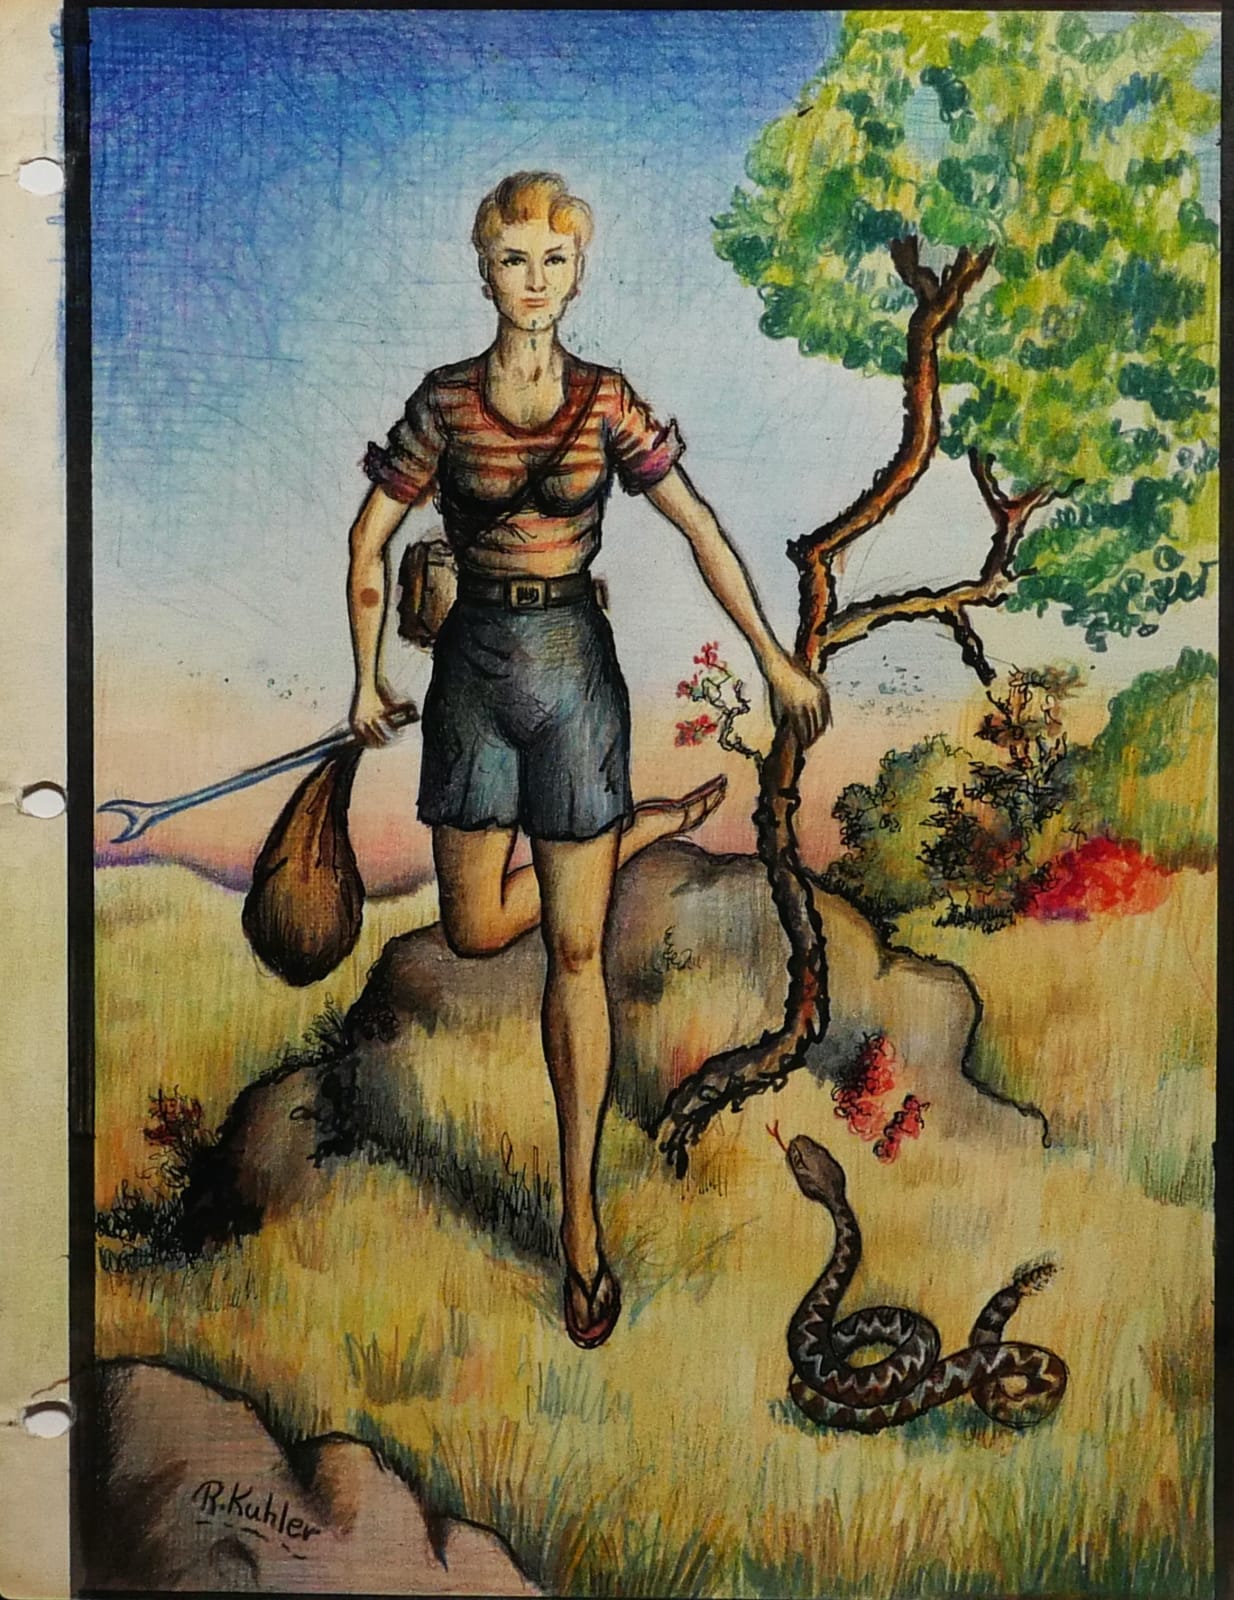 Snake hunting summer camp girl, 1959 Colored pencil on sketch paper 11 x 8 1/2 in. (RK 133) $7,000